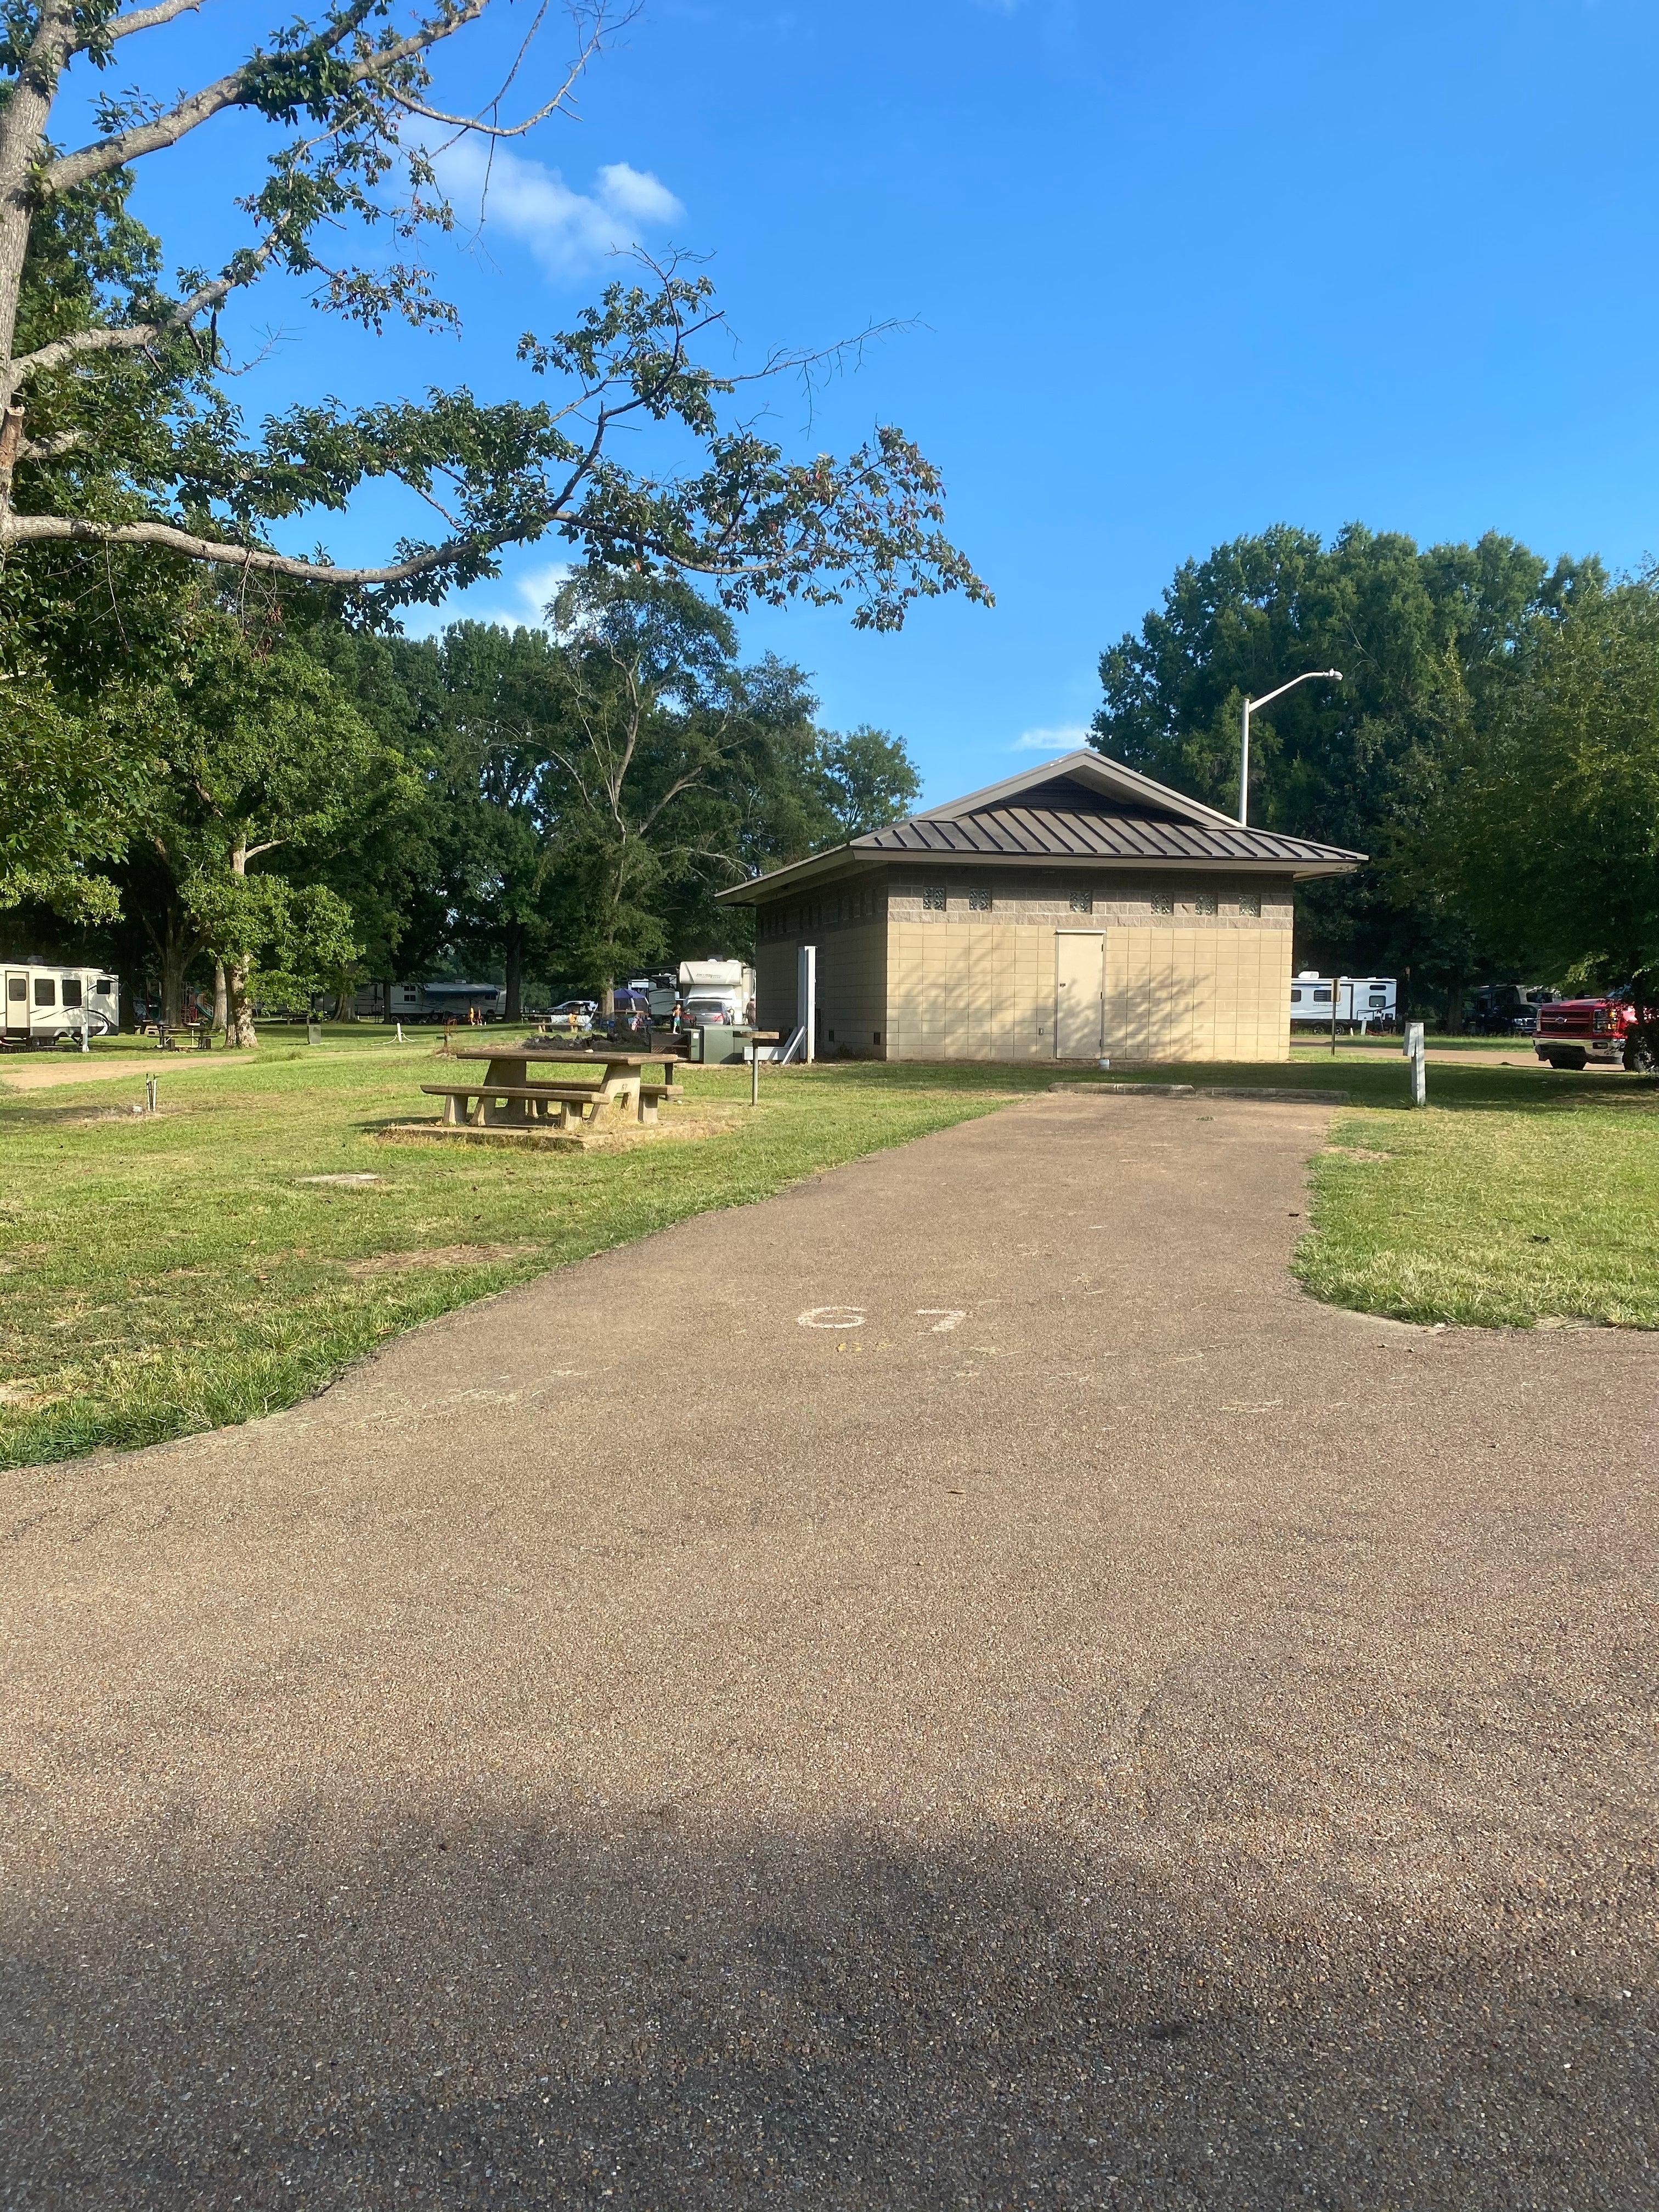 Camper submitted image from John W Kyle State Park — John W. Kyle State Park - 4